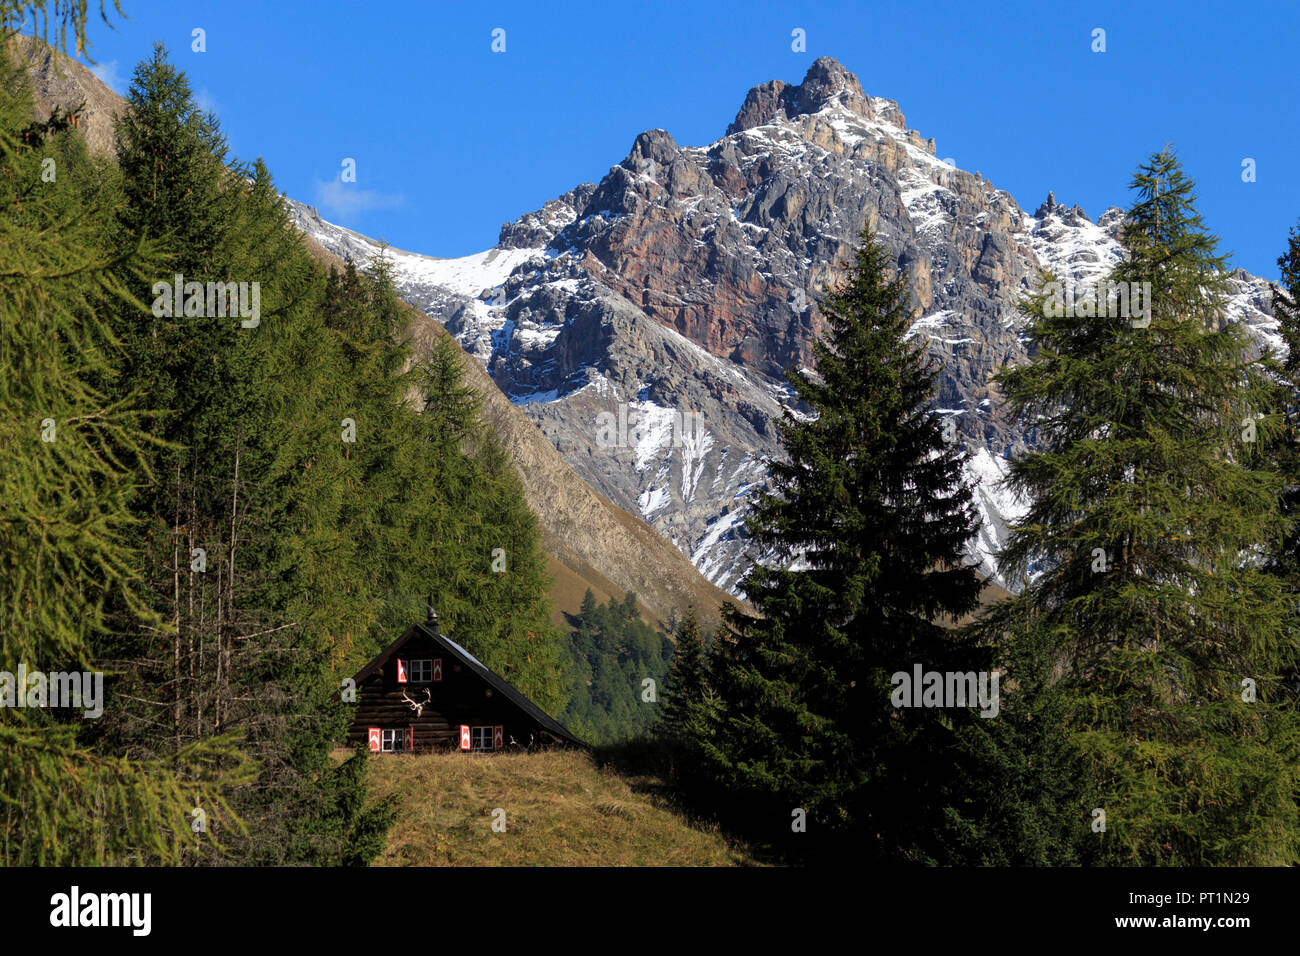 Parkhütte Varusch at the begininning of Swiss National Park with Piz Saliente in the background, val Trupchun, S-Chanf, Engadin, Canton Grisons, Switzerland, Europe Stock Photo